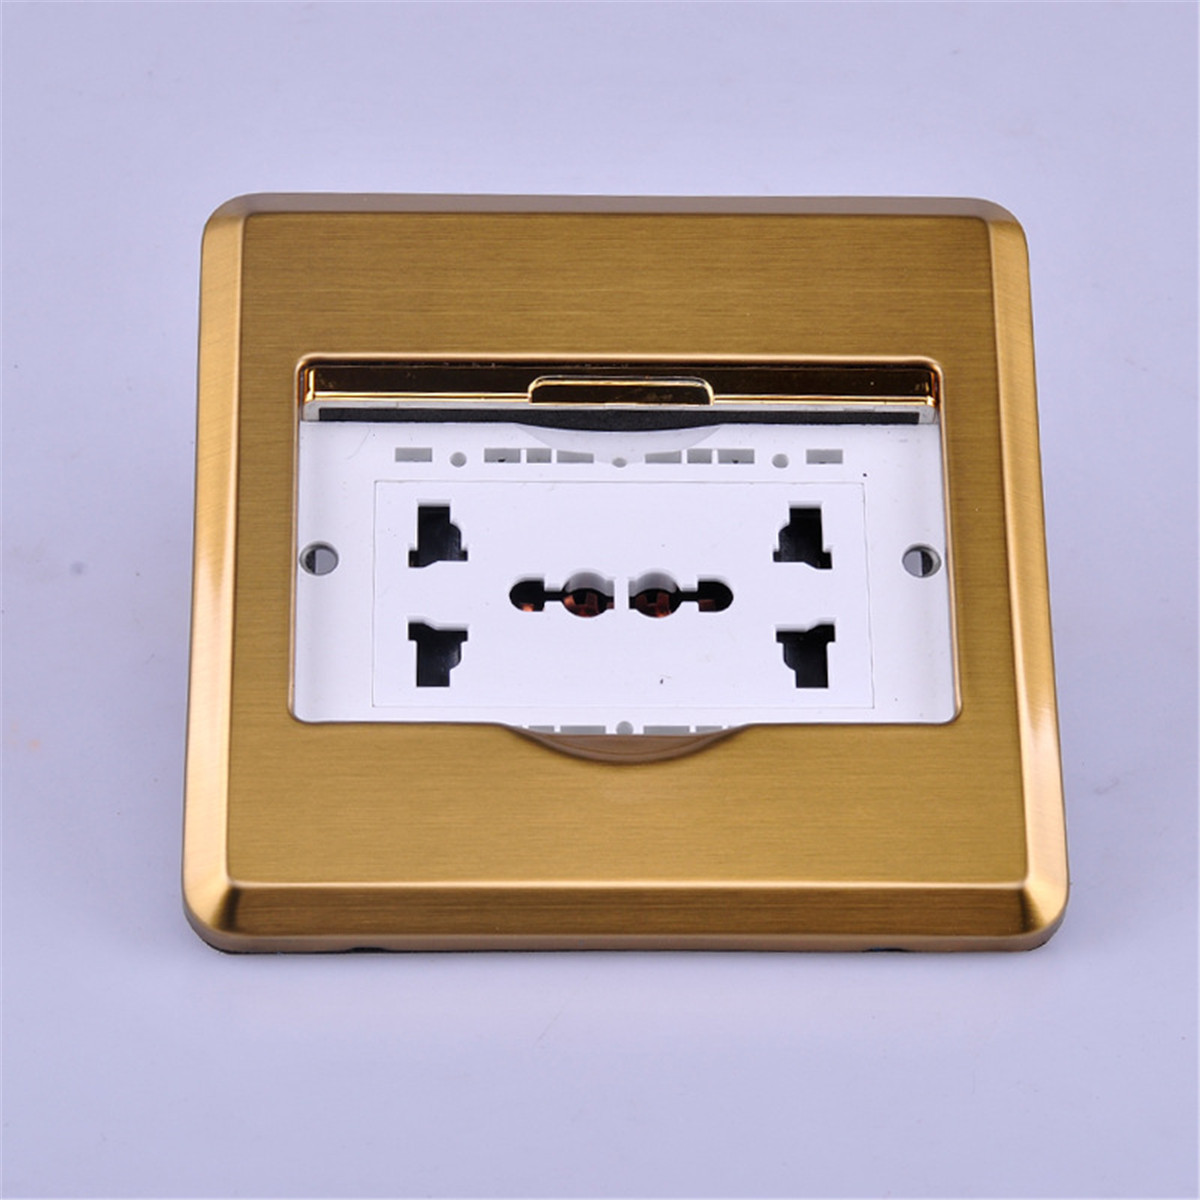 10A-Floor-Wall-Plate-Ground-Power-Outlet-Universal-Power-Socket-Charger-Receptacle-1510214-10